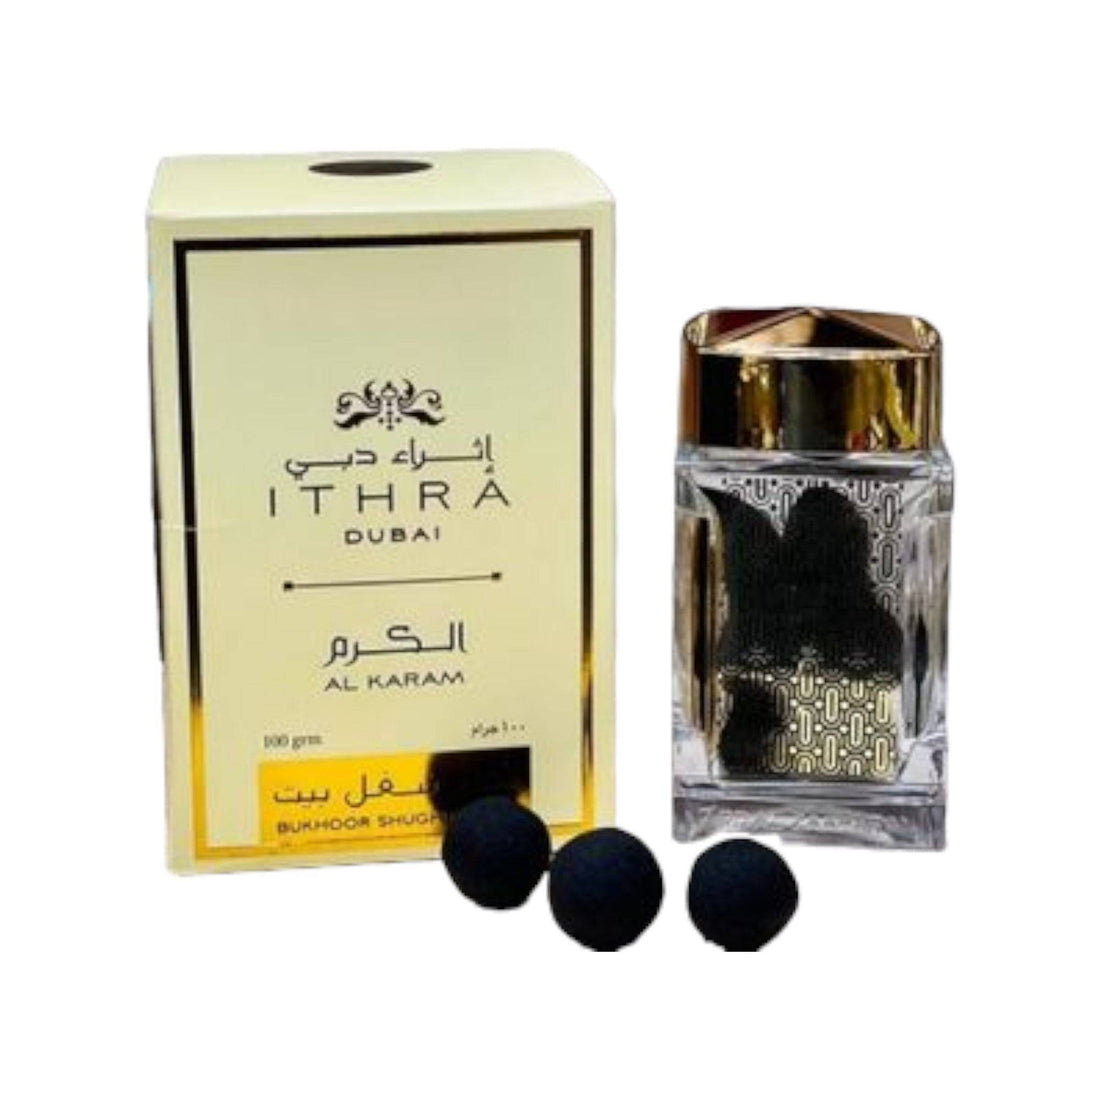 Al Karam Bakhoor 100g by Ithra Dubai displayed in elegant packaging, ideal for creating a peaceful home environment with scents of musk, vanilla, and sandalwood.